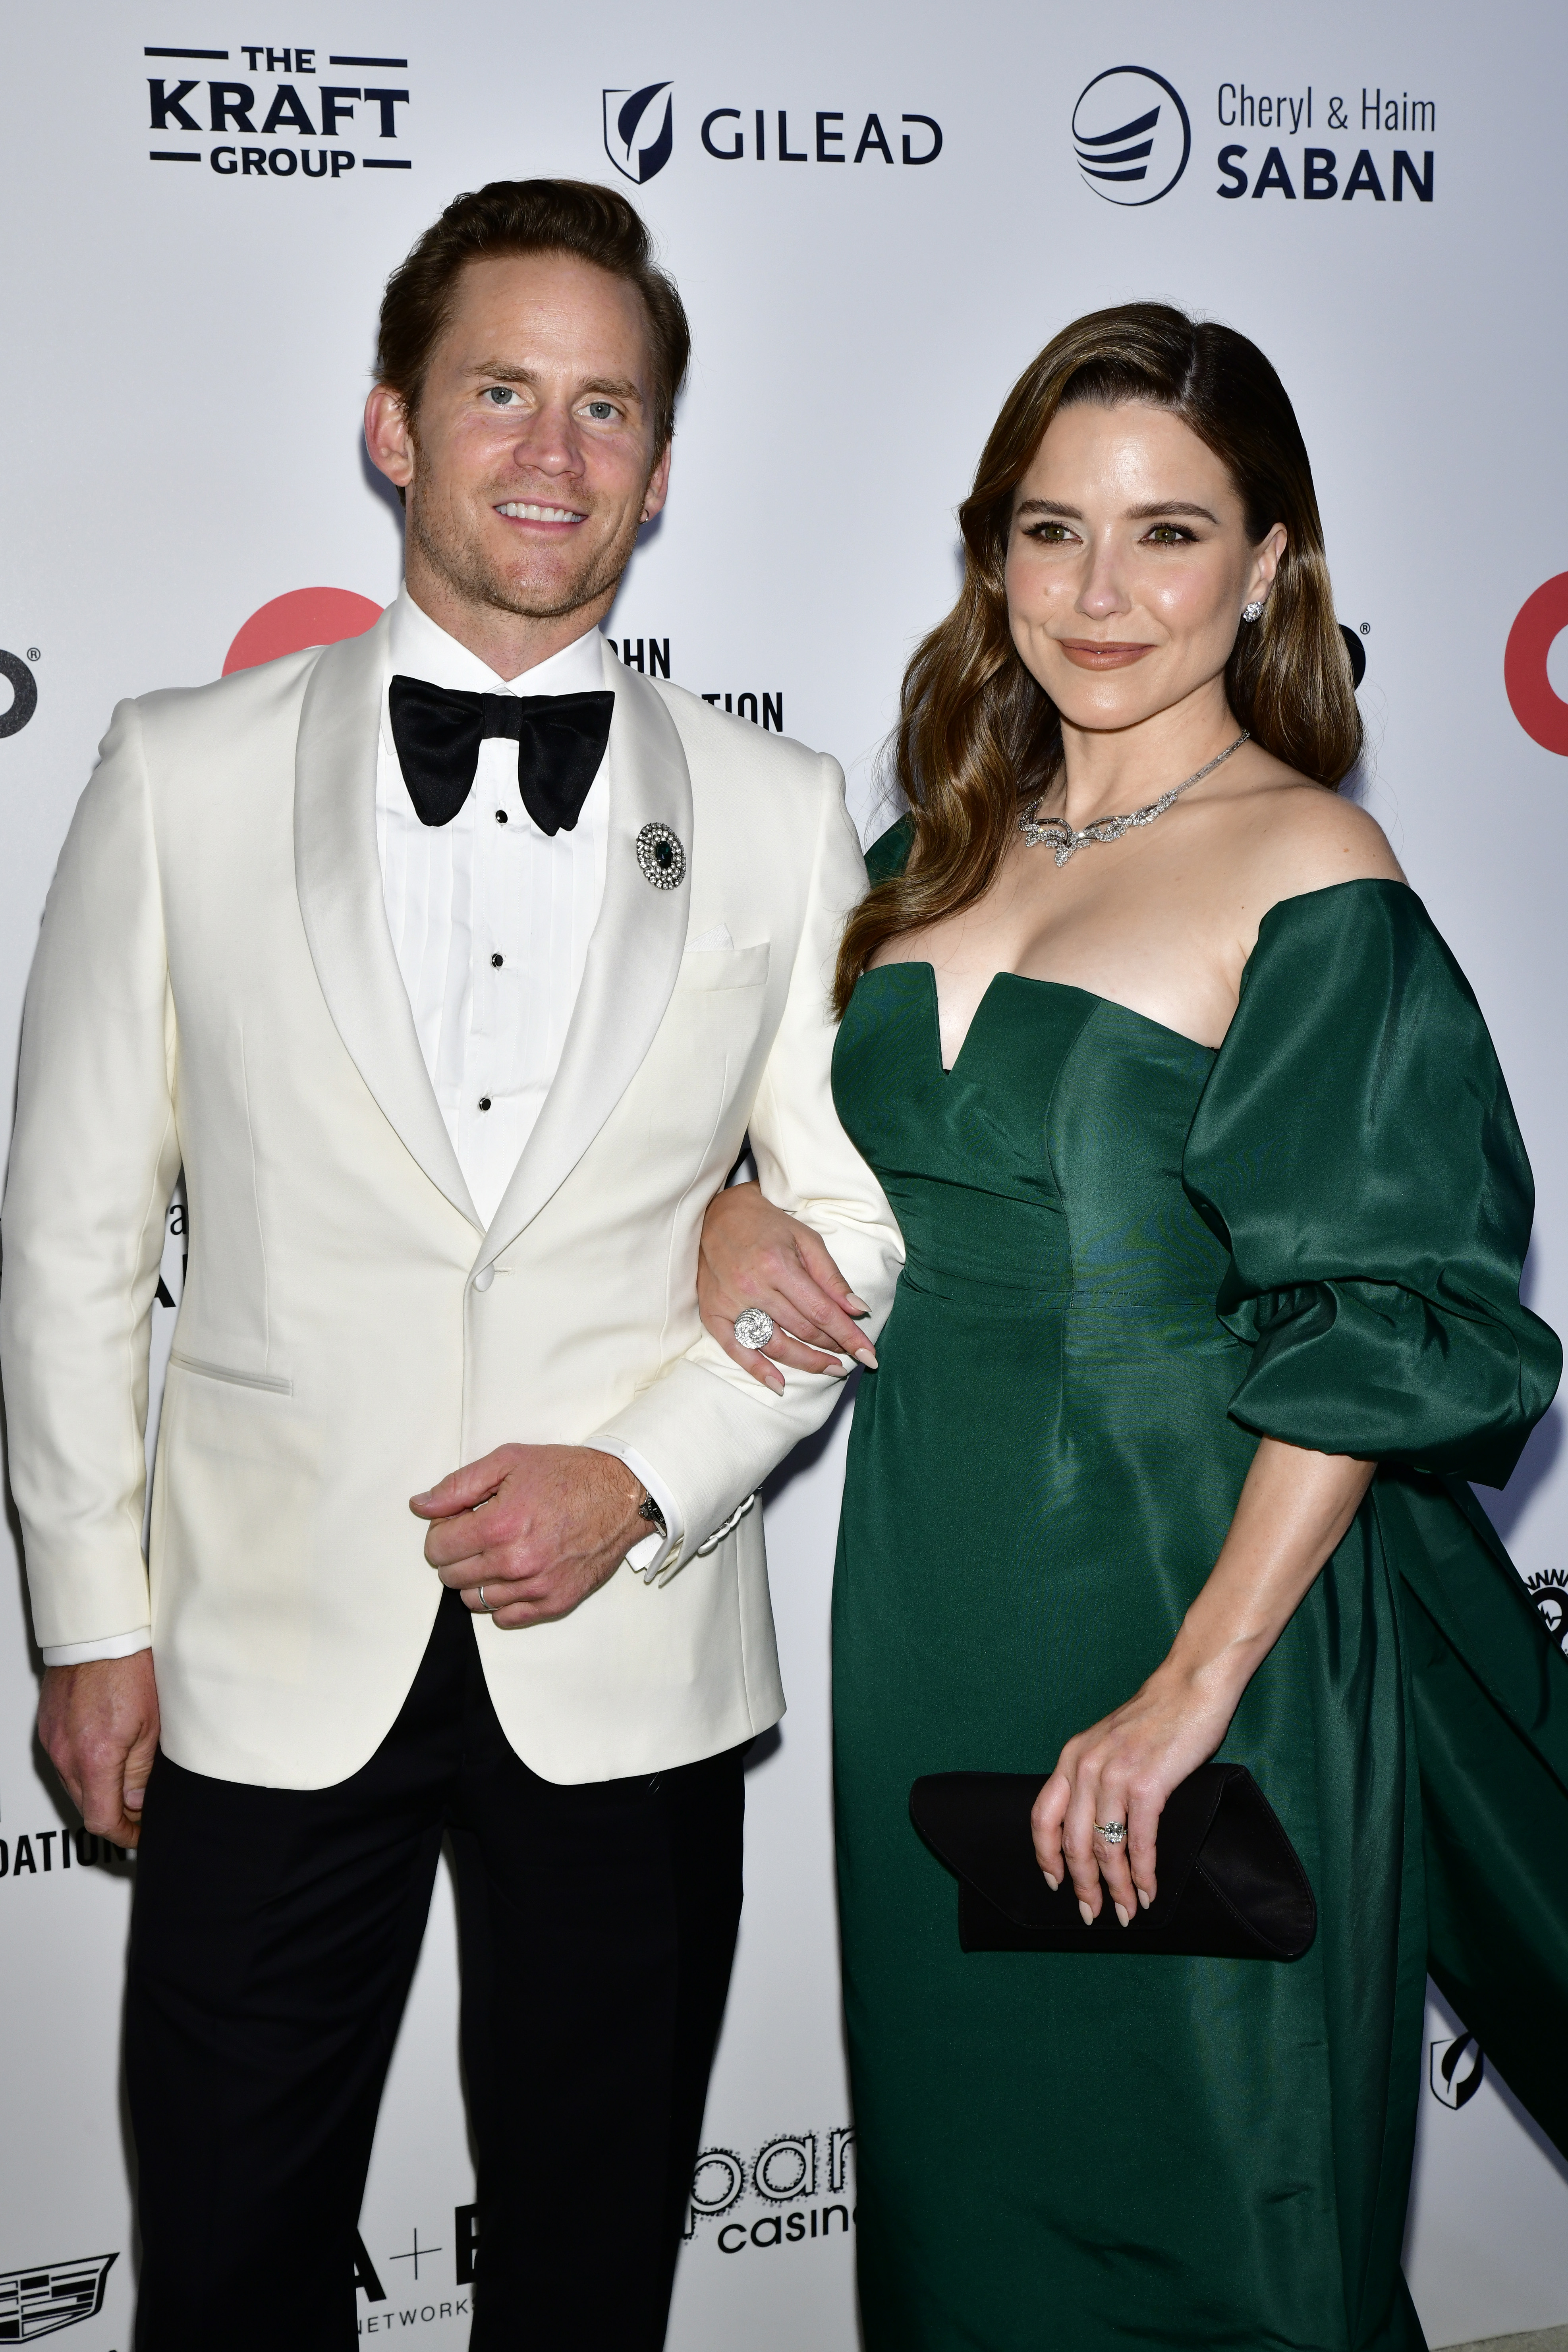 A closeup of Grant Hughes and Sophia Bush arm-in-arm at formal event